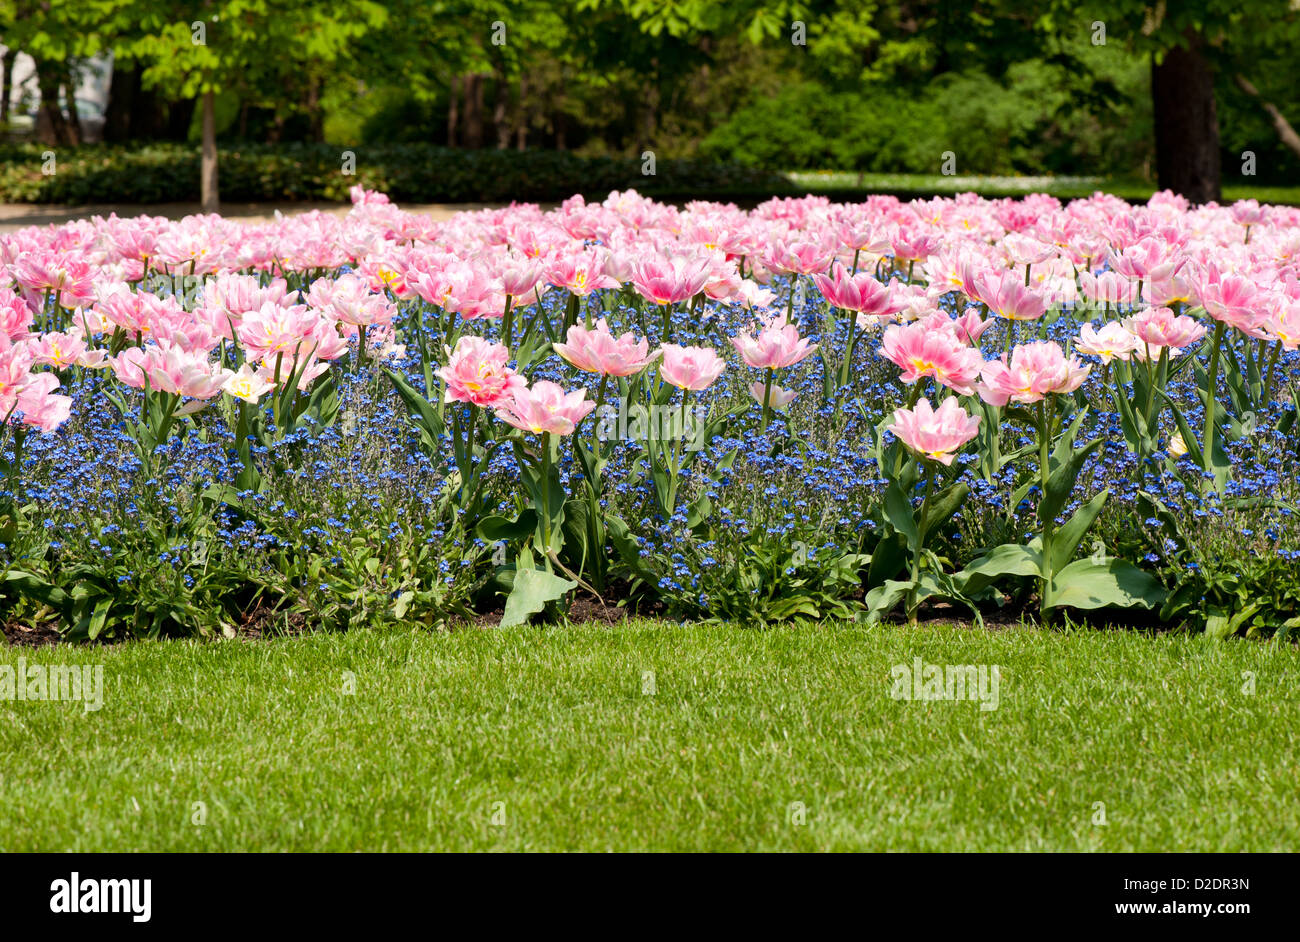 Foxtrot tulips and Myosotis called forget-me-not Stock Photo